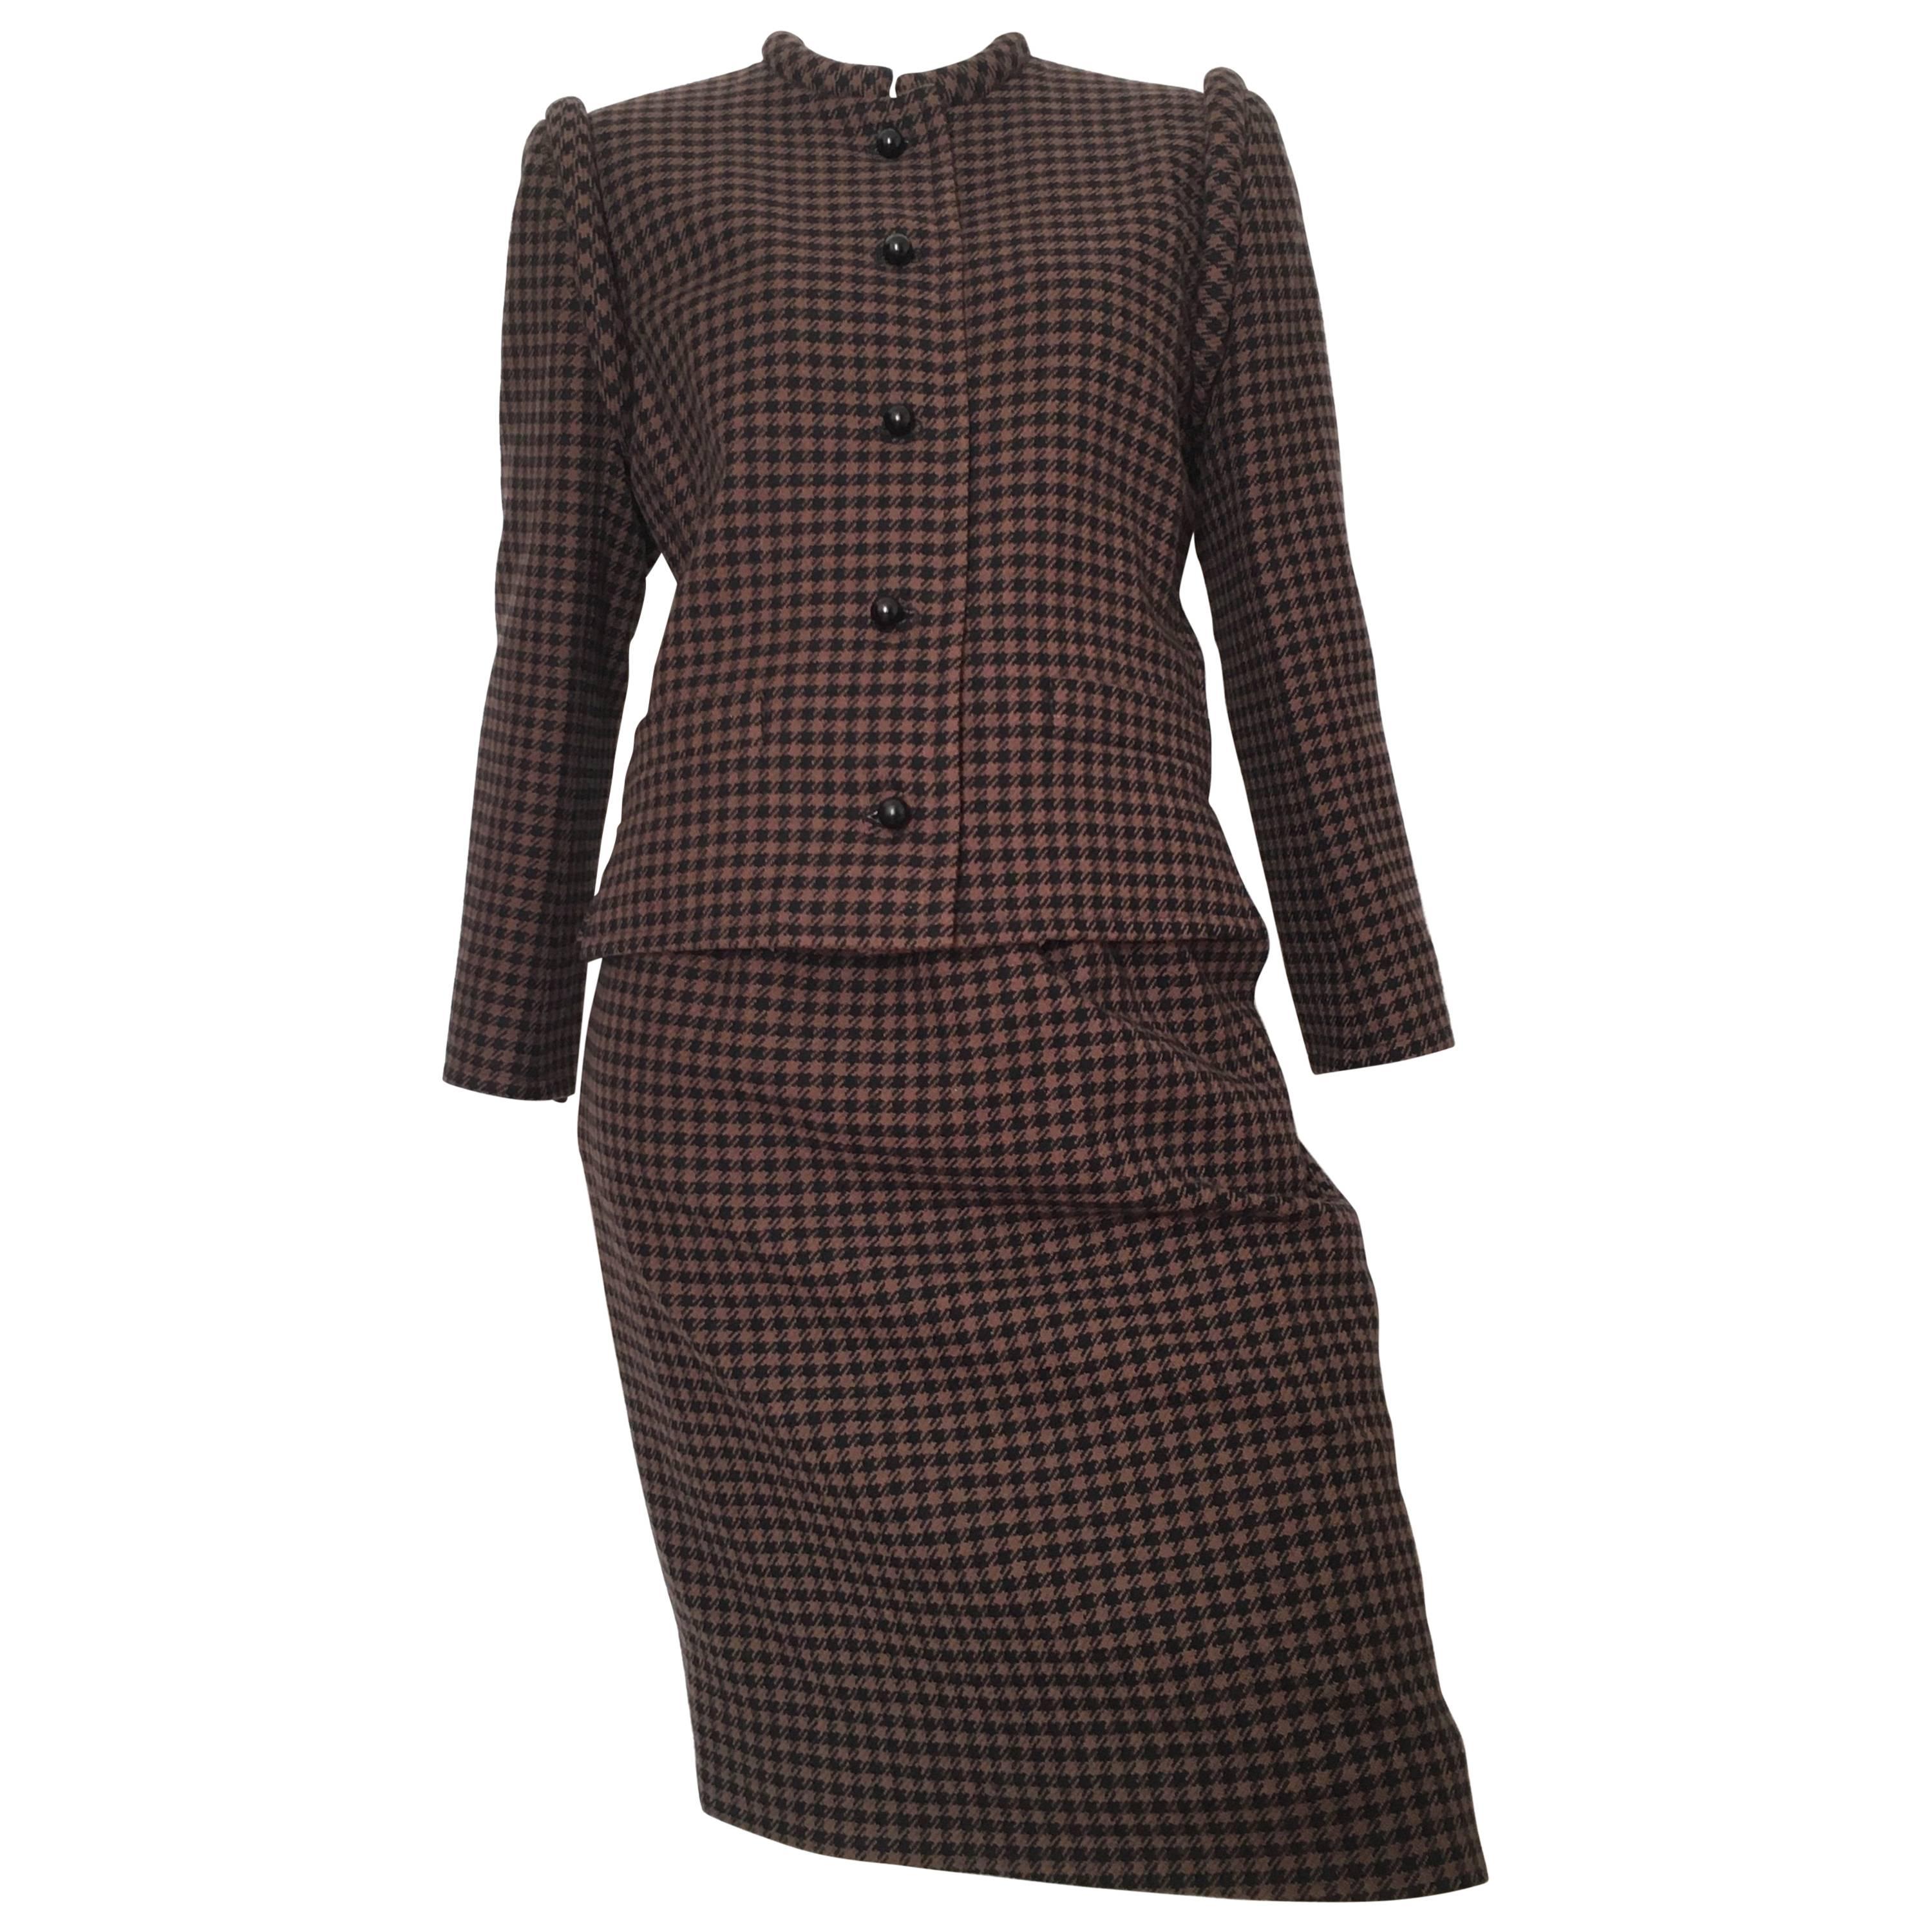 Nina Ricci 1970s Wool Brown and Black Houndstooth Jacket and Skirt Set Size 6. For Sale